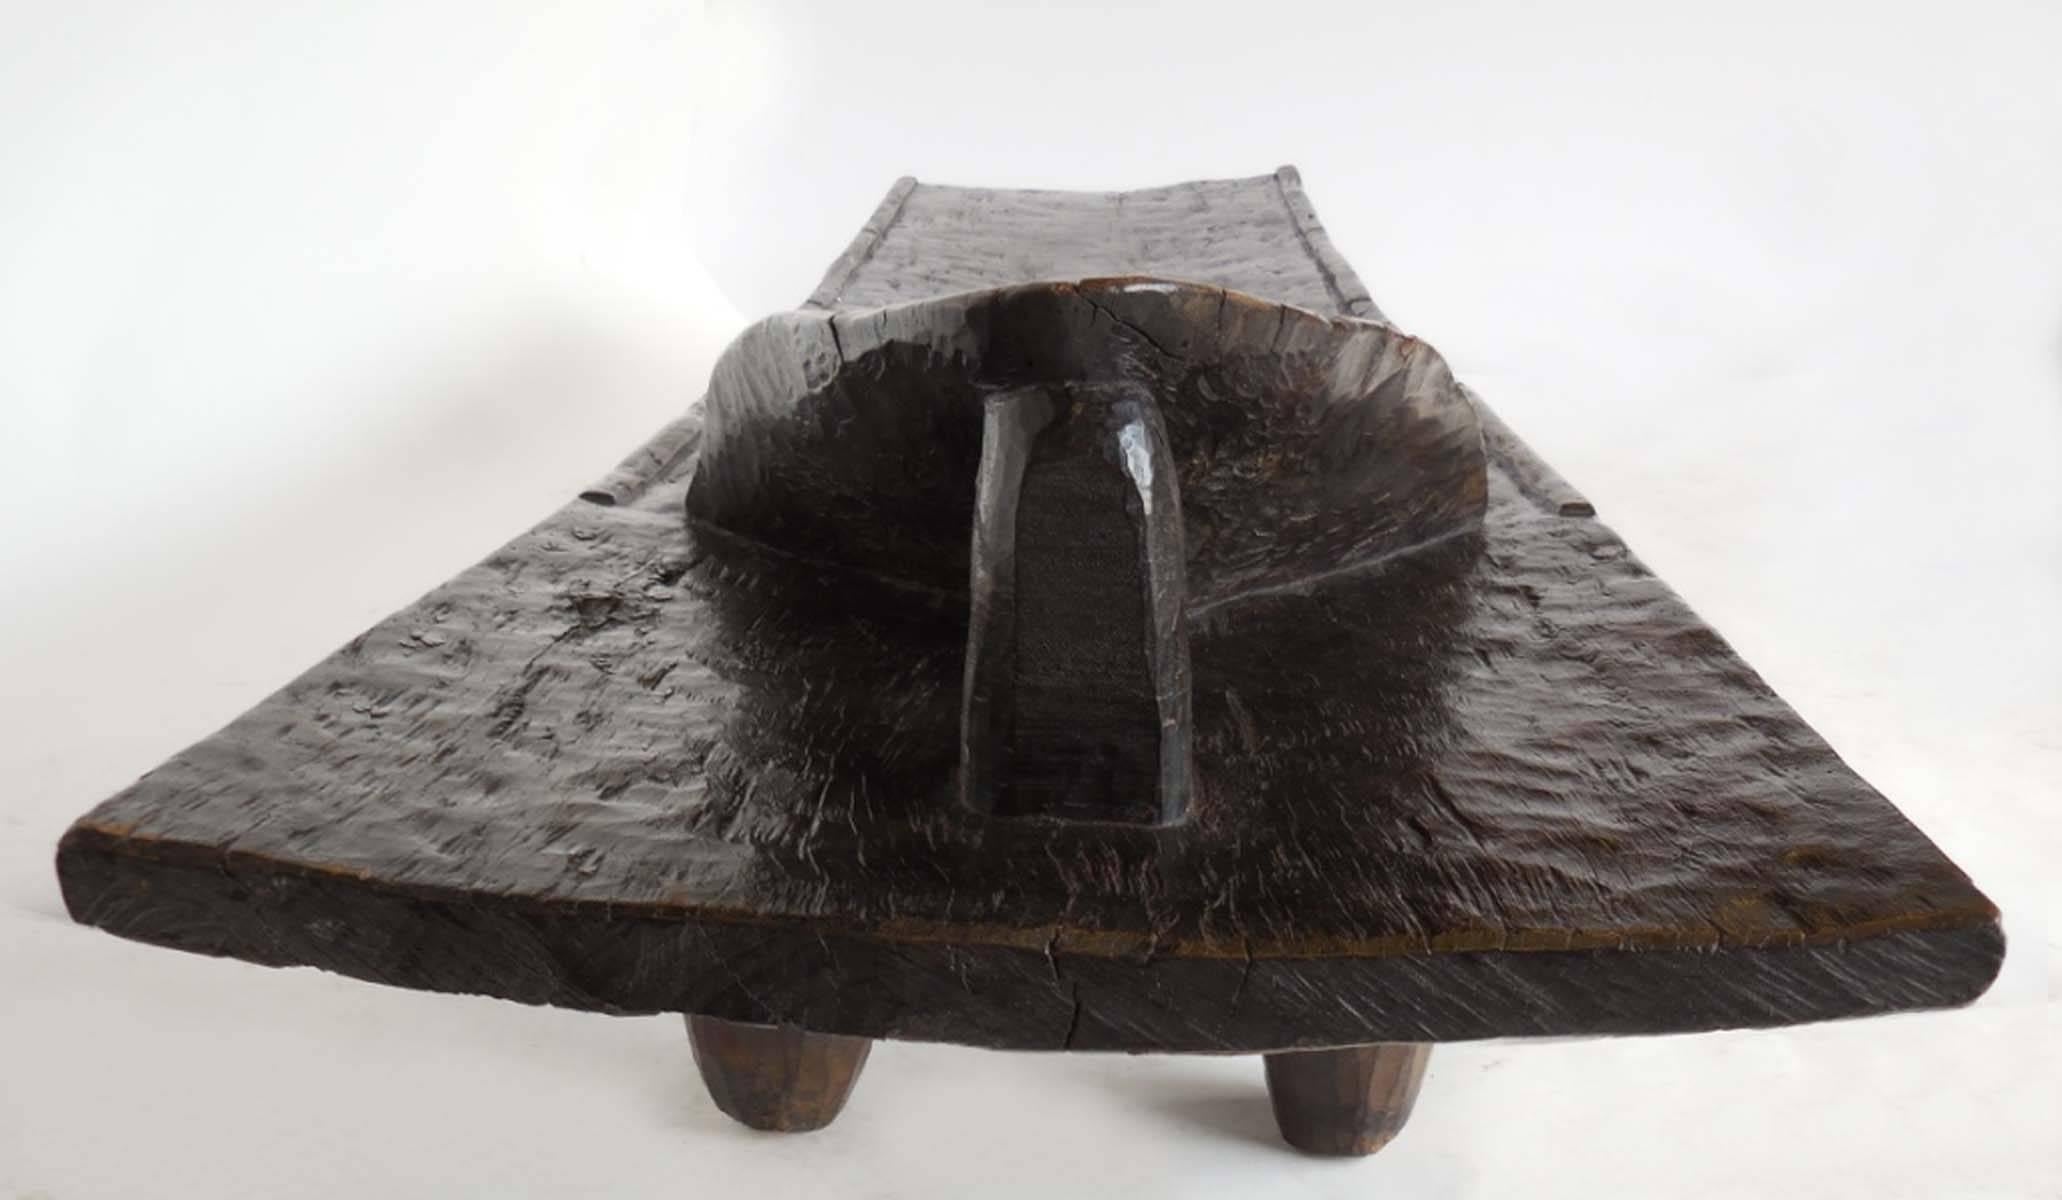 Carved Antique Senufo Bed from Mali